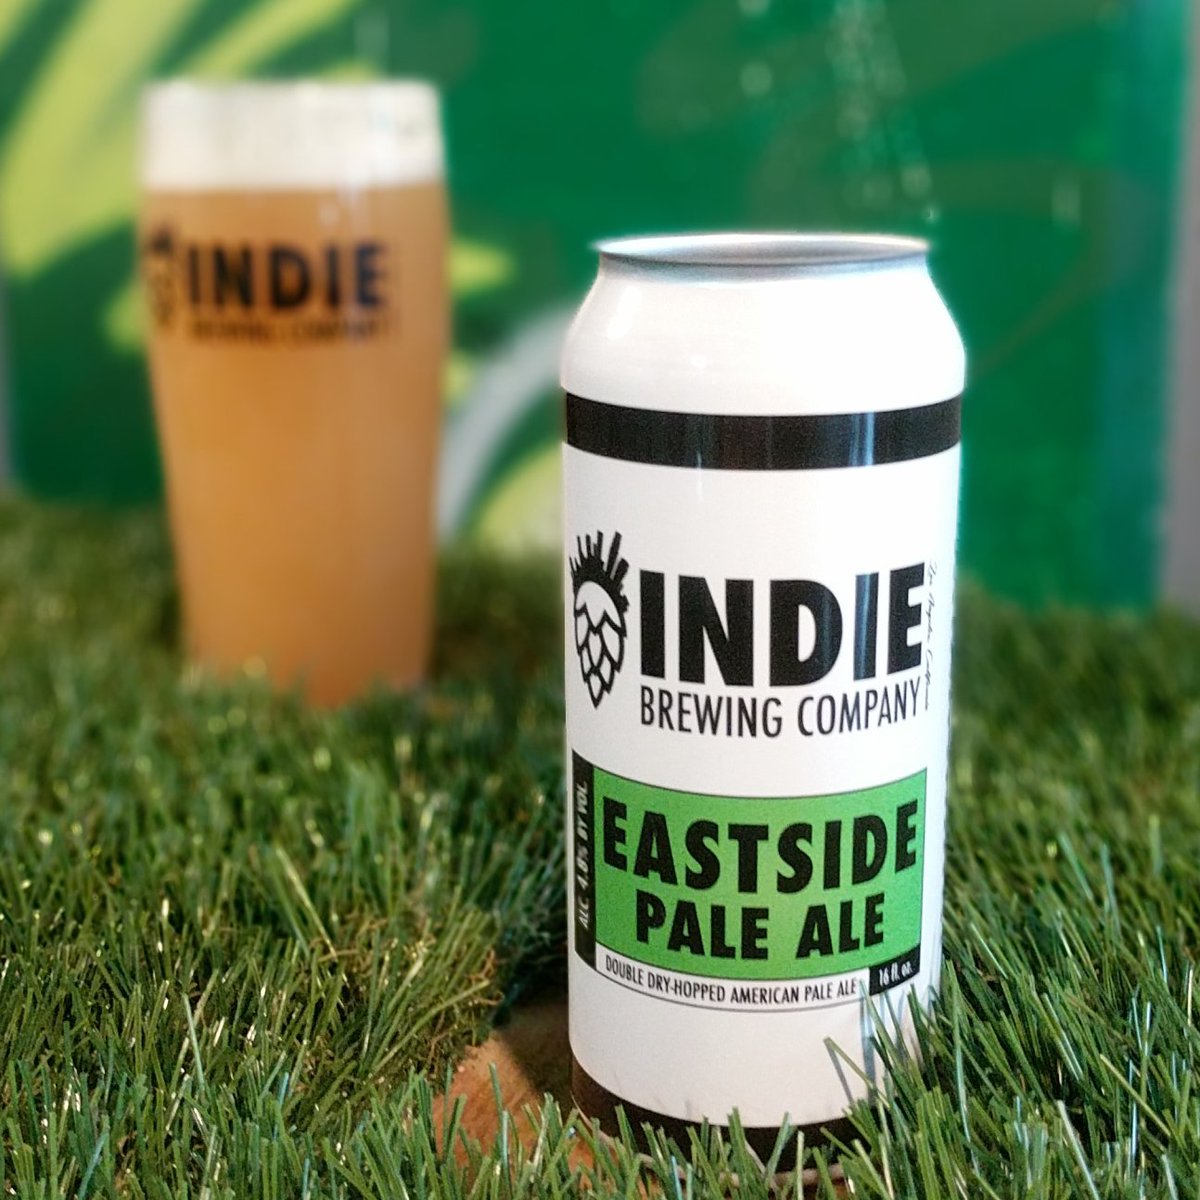 Eastside Pale Ale will FINALLY be returning tomorrow...in cans! This 100% Simcoe beer is one of our favorites and we can't wait to share it with you. Tasting room opens at 4, so come grab a 4-pack [$12/pk, 1 case max]. #DTLABrews #CraftCans #LABeer #BeerPaperLA